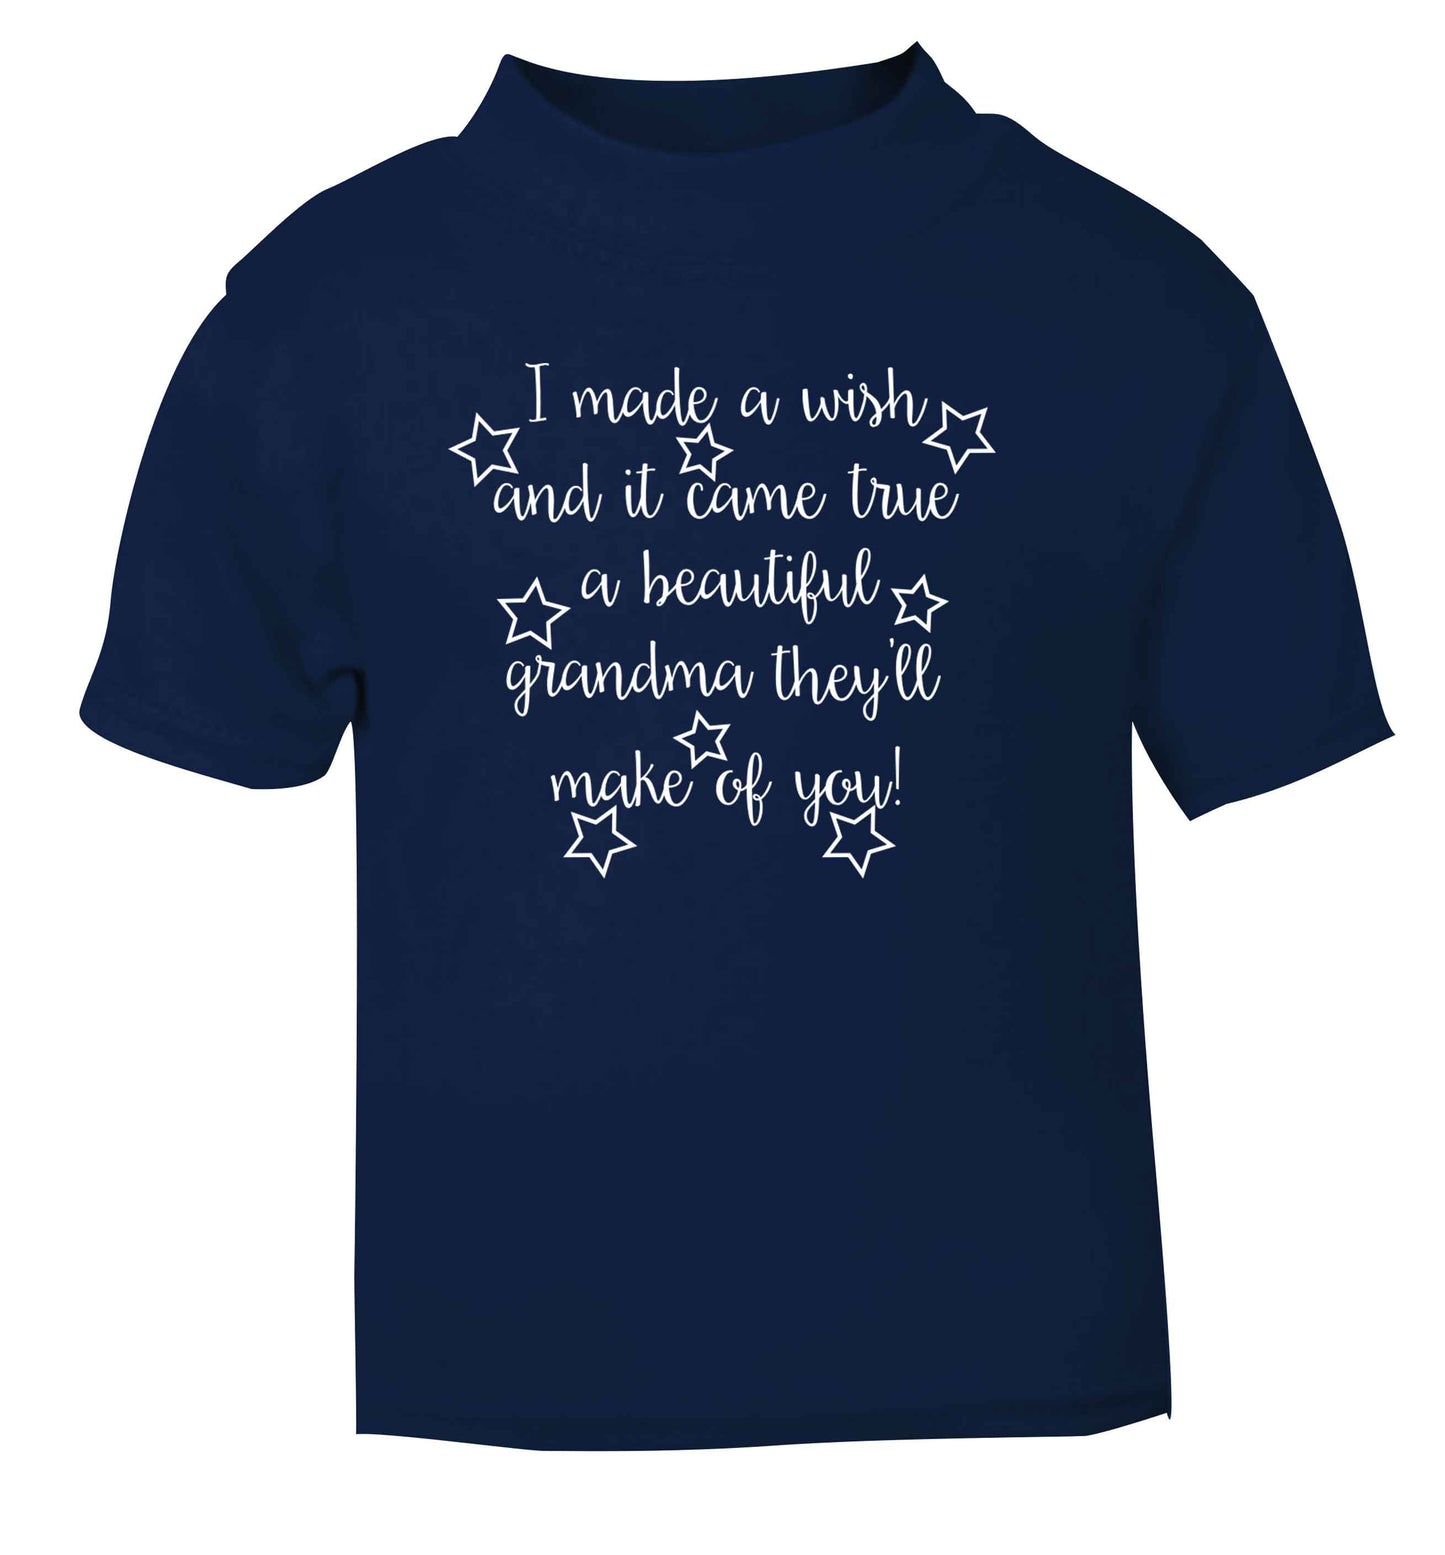 I made a wish and it came true a beautiful grandma they'll make of you! navy Baby Toddler Tshirt 2 Years